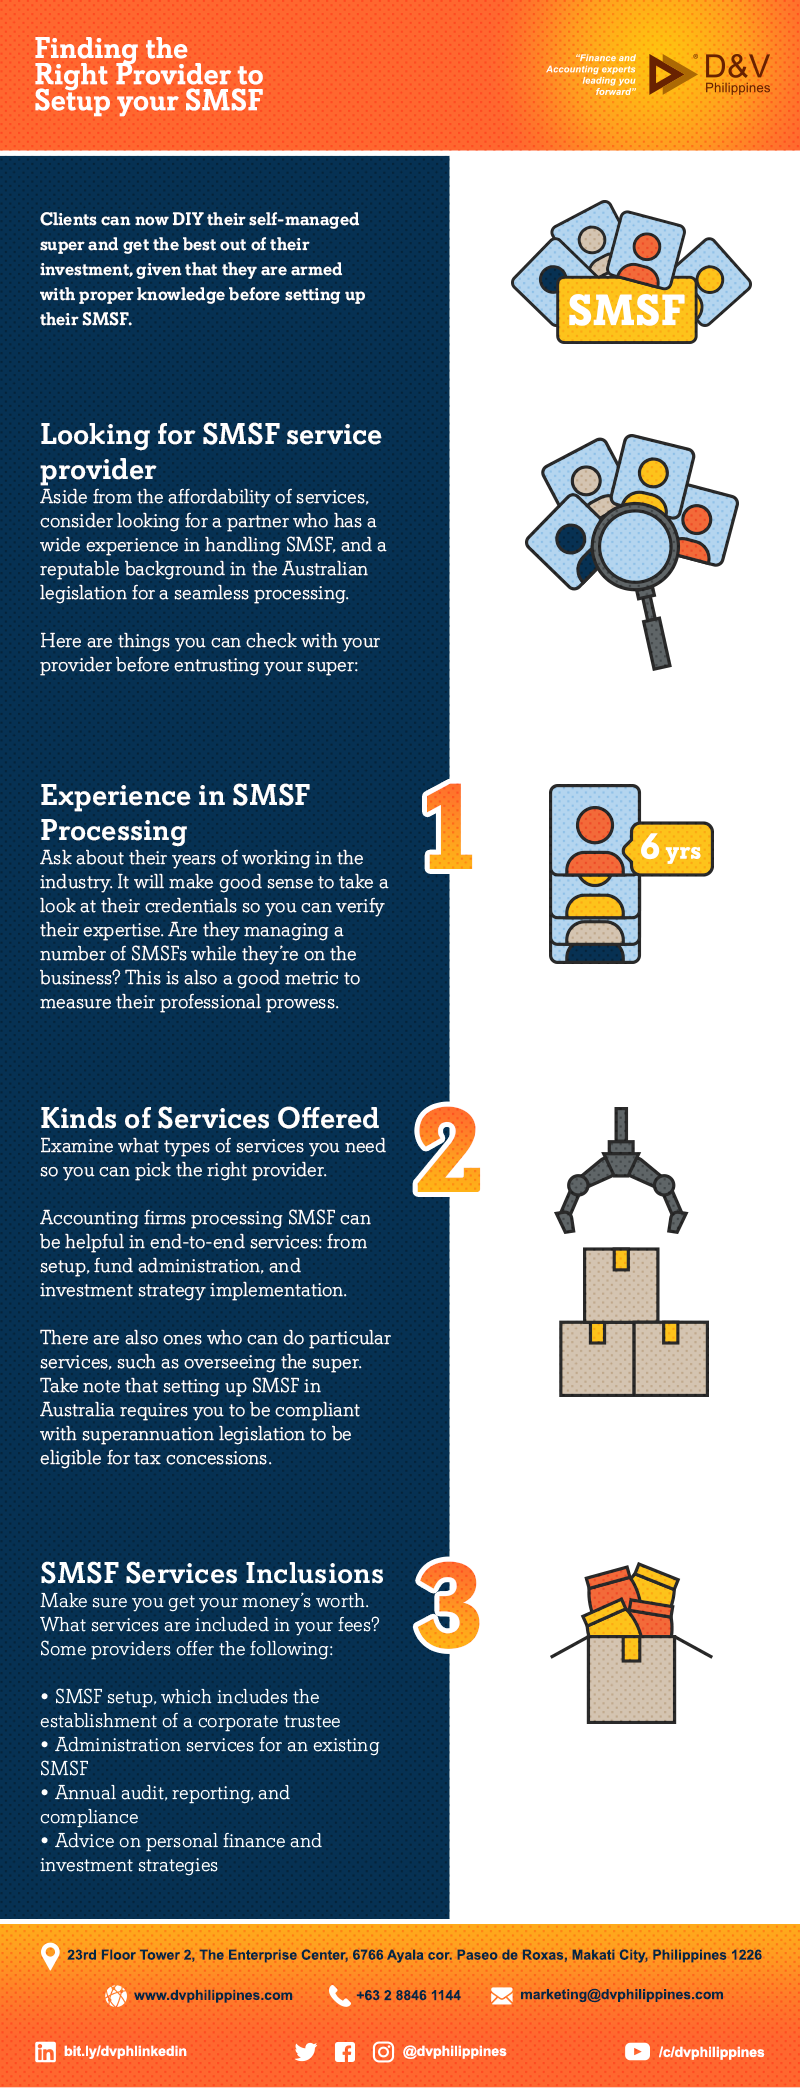 Infograpihcs_Finding-the-Right-Provider-to-Setup-your-SMSF_Main